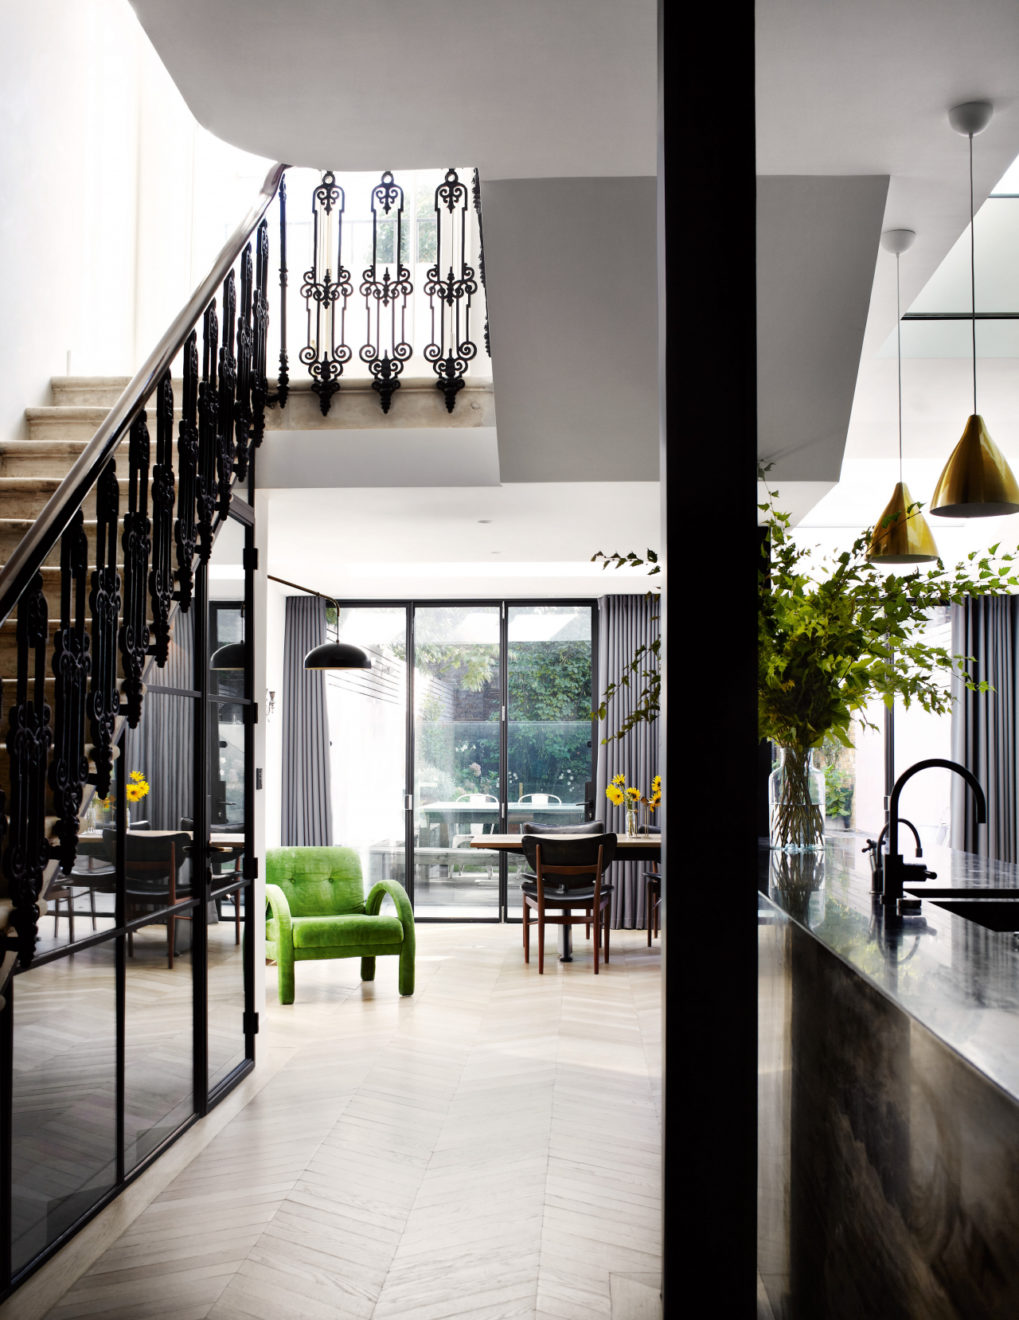 A sophisticated townhouse - Suzy Hoodless - Interior designer - Aucoot Estate Agents